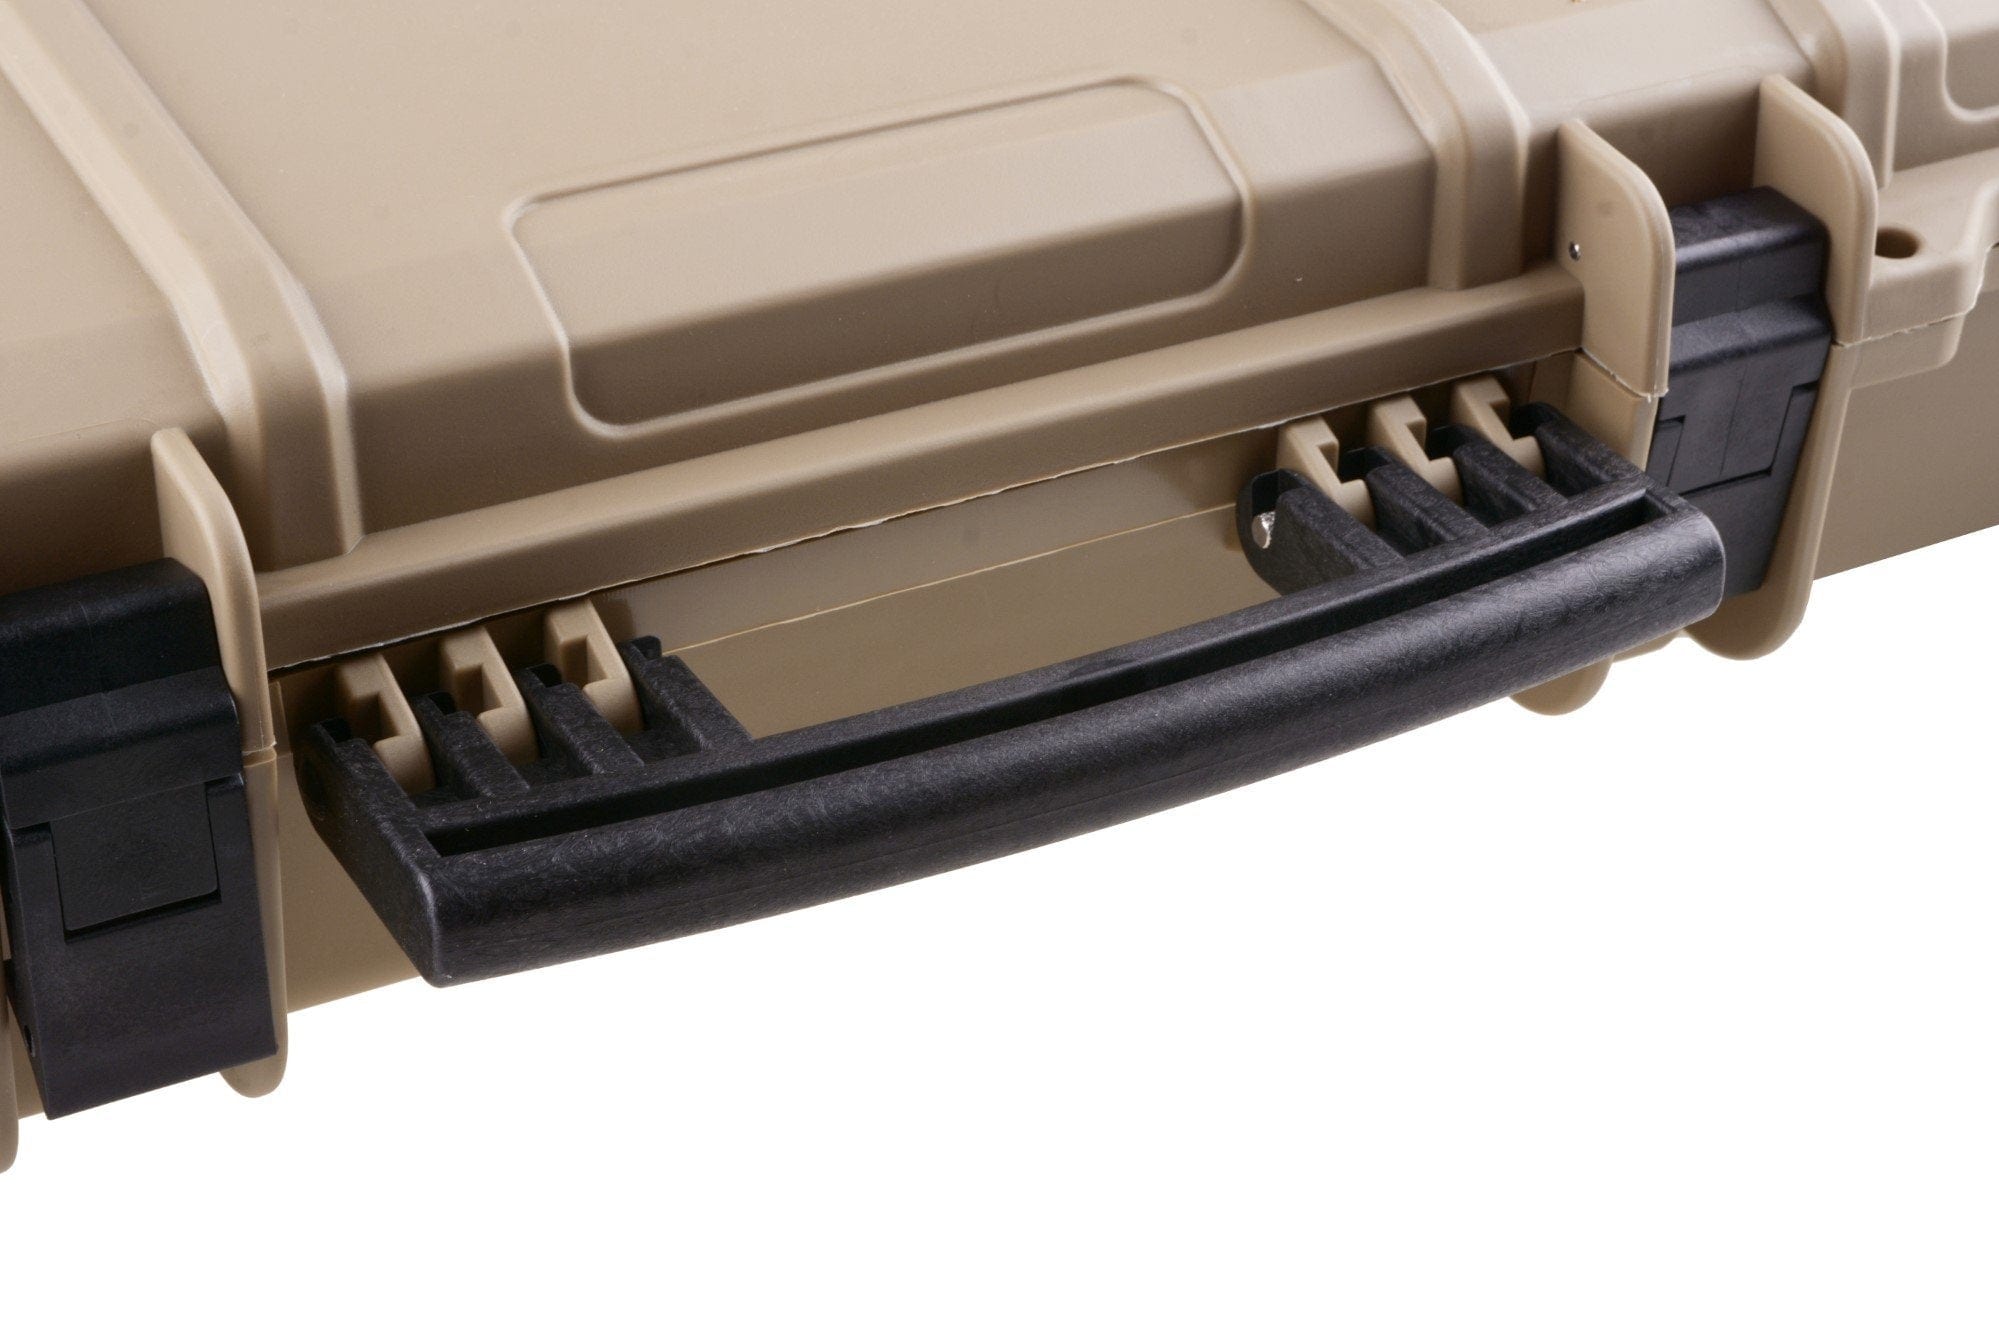 Nuprol PNP Hard Case 110cm - Tan by Nuprol on Airsoft Mania Europe